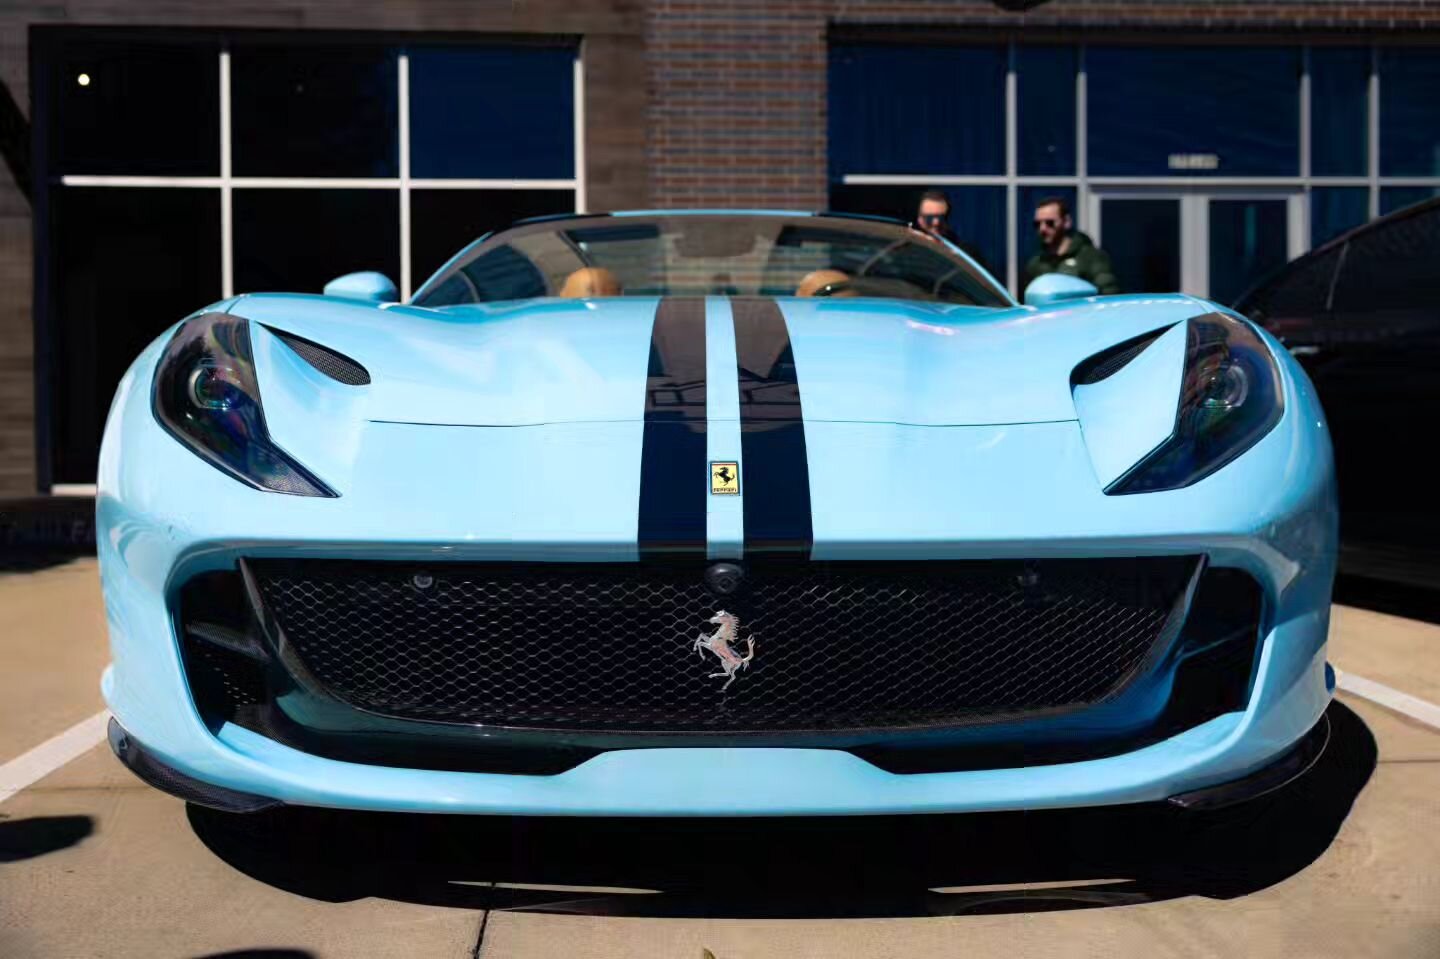 Don't normally like that blue in cars.. but if it comes with a Ferrari then I guess I can make an exception 😂🚙🥶📸👀

#collegestationphotographer #bryantexasphotography #automotive_photography #carsandcoffee #cstatgradphotographer #bluecarblues #fe